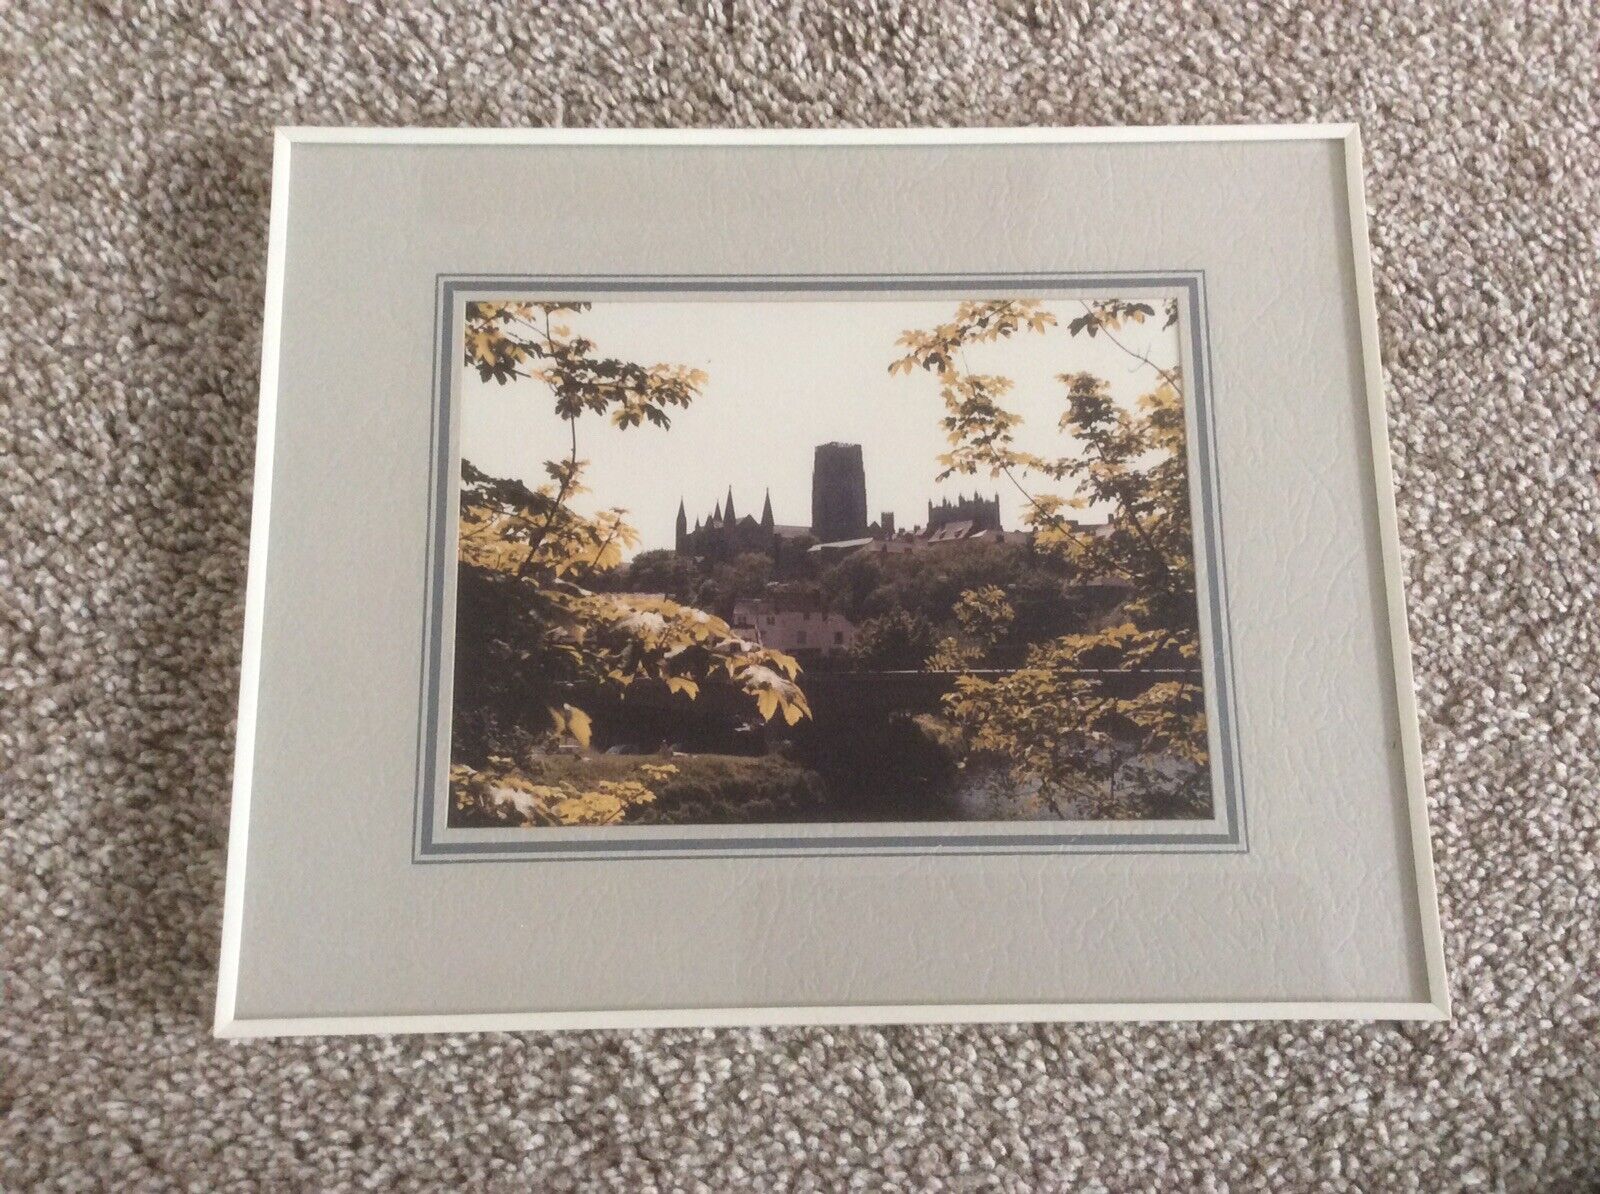 House Clearance - Durham Cathedral Framed Photograph